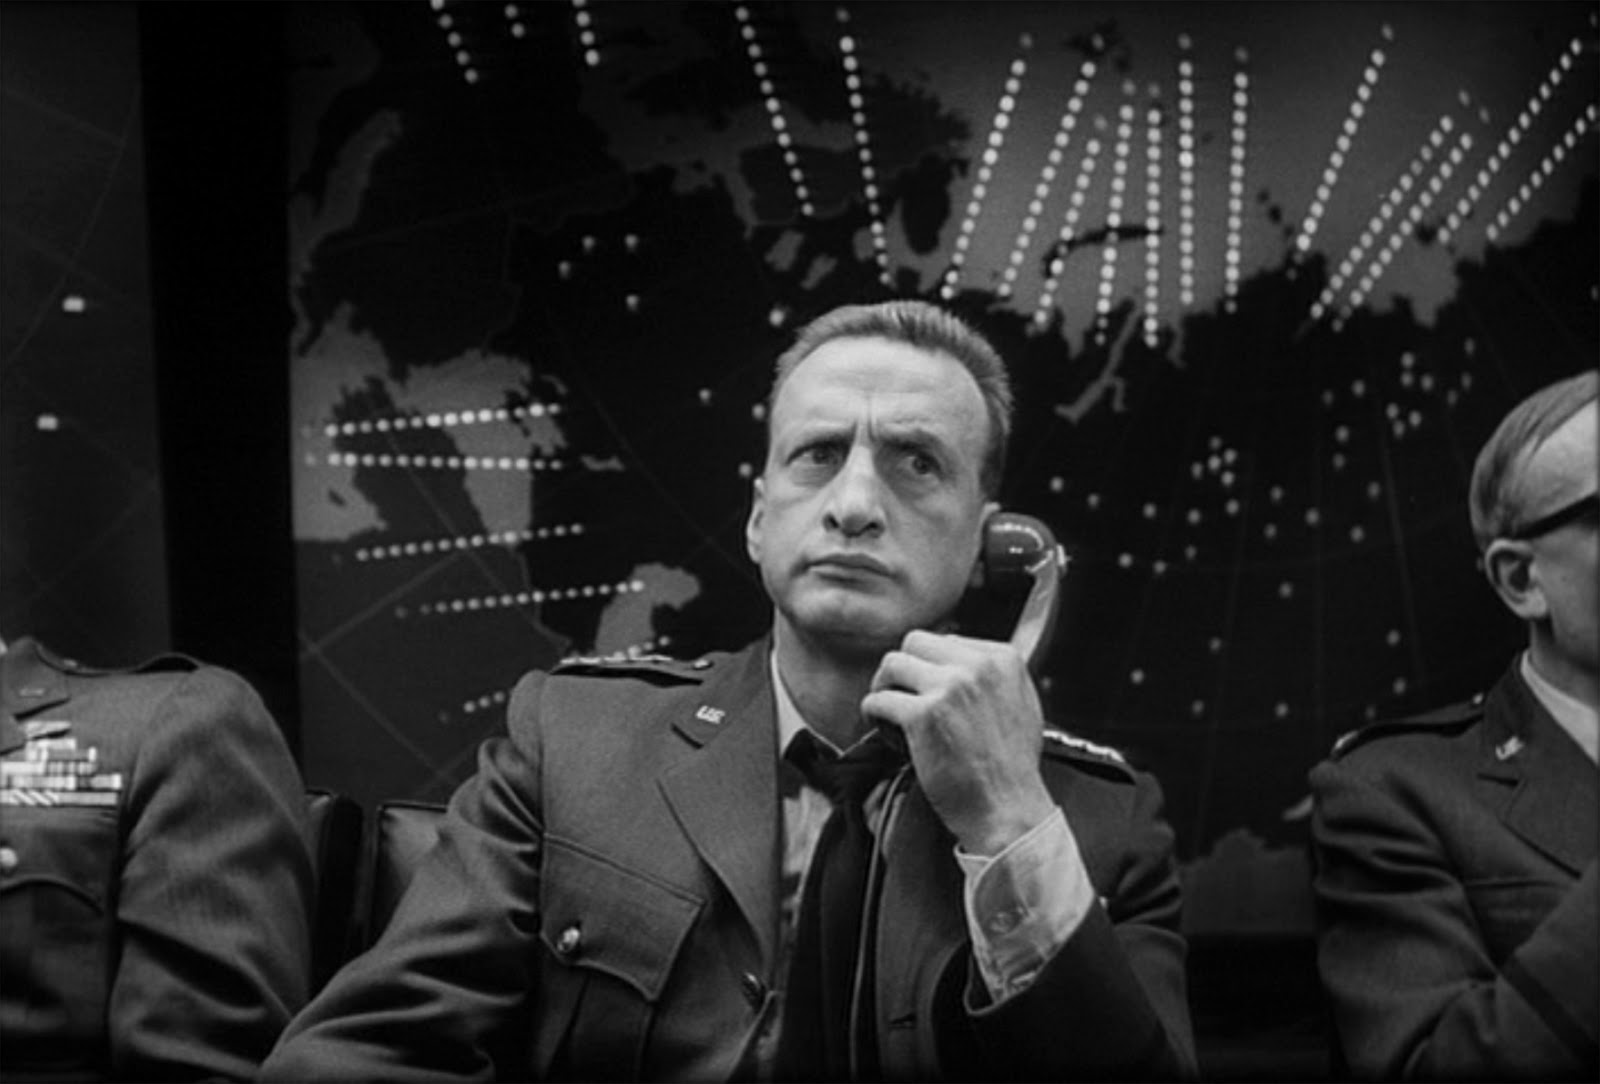 Scene from Dr. Strangelove, copyrighted by the original owner.